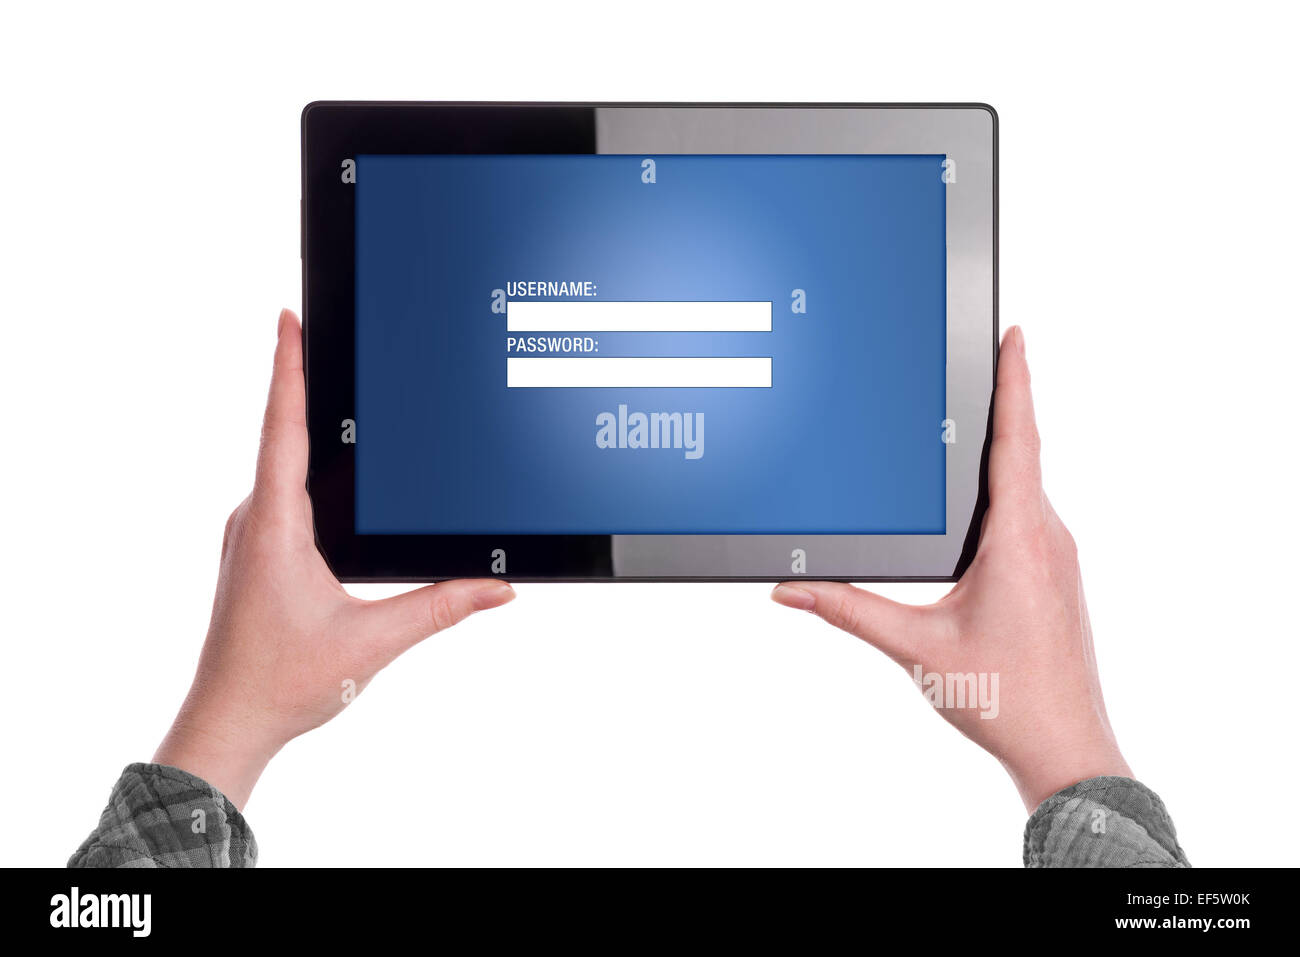 Hands holding Digital Tablet Computer with Login Web Page Form displayed Stock Photo